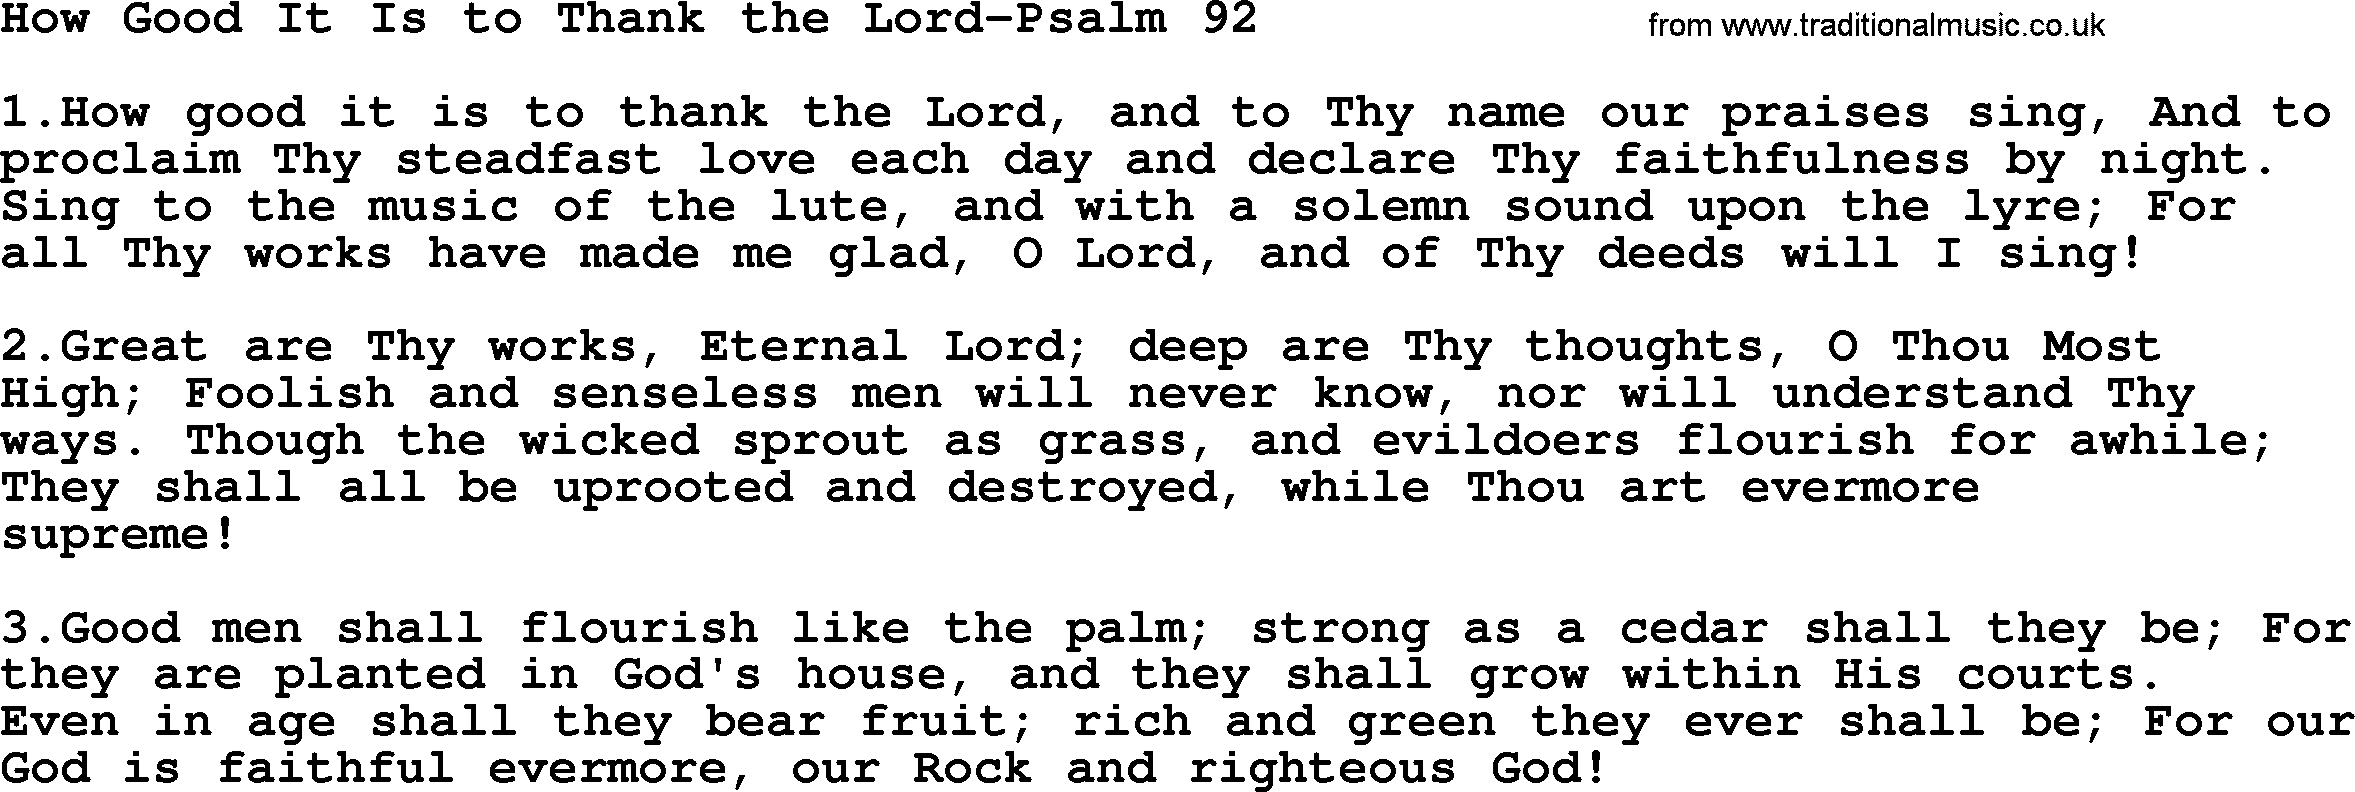 Hymns from the Psalms, Hymn: How Good It Is To Thank The Lord-Psalm 92, lyrics with PDF